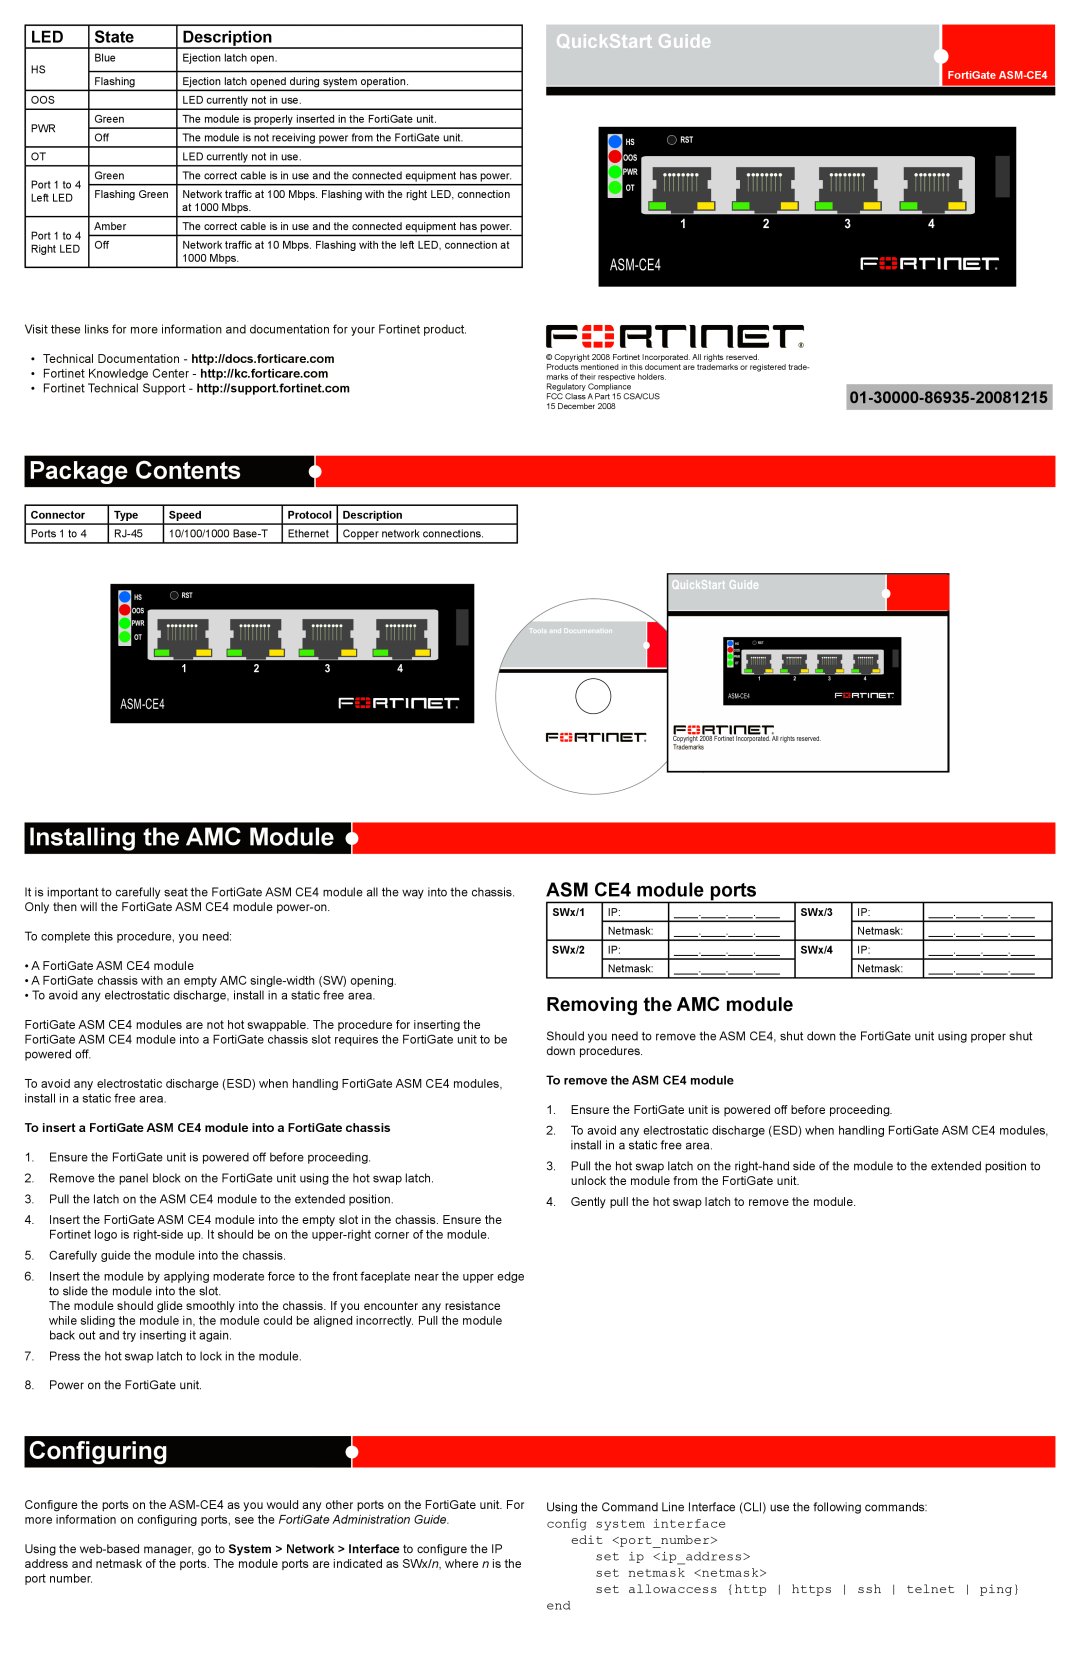 Fortinet ASM-CE4 quick start Package Contents, Installing the AMC Module, Configuring, QuickStart Guide, State 